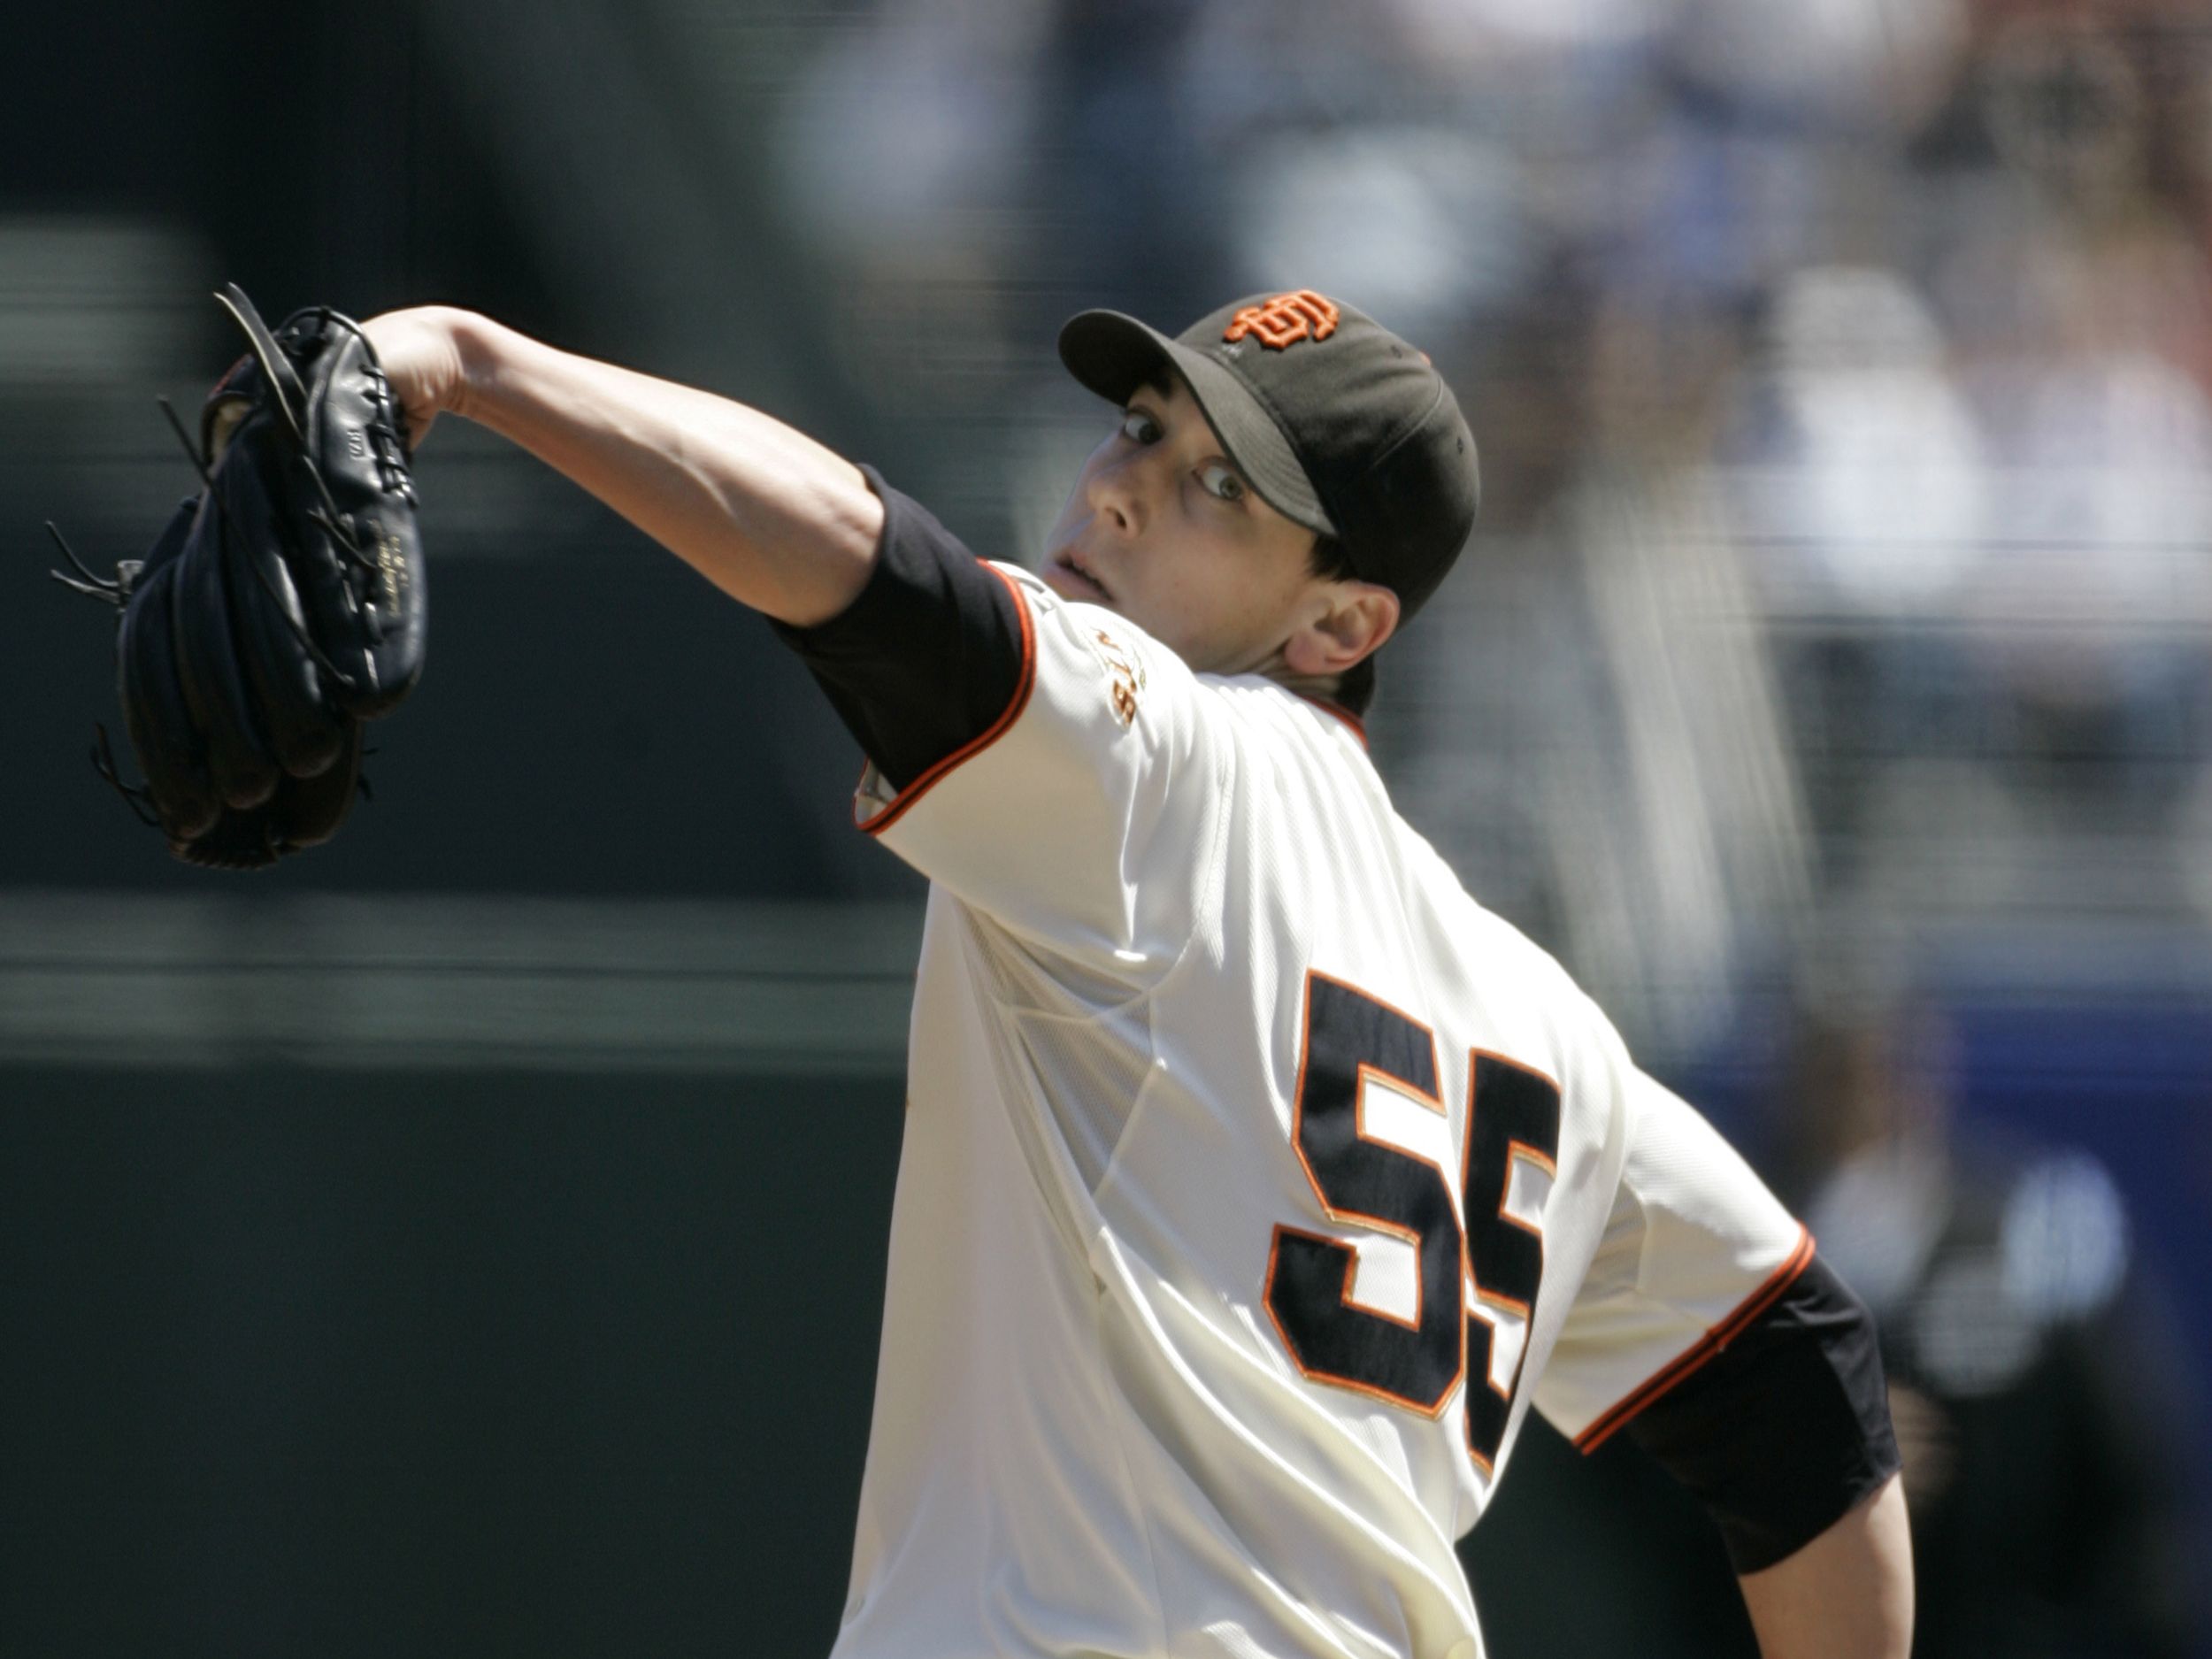 Giants announce death of former All-Star pitcher Tim Lincecum's